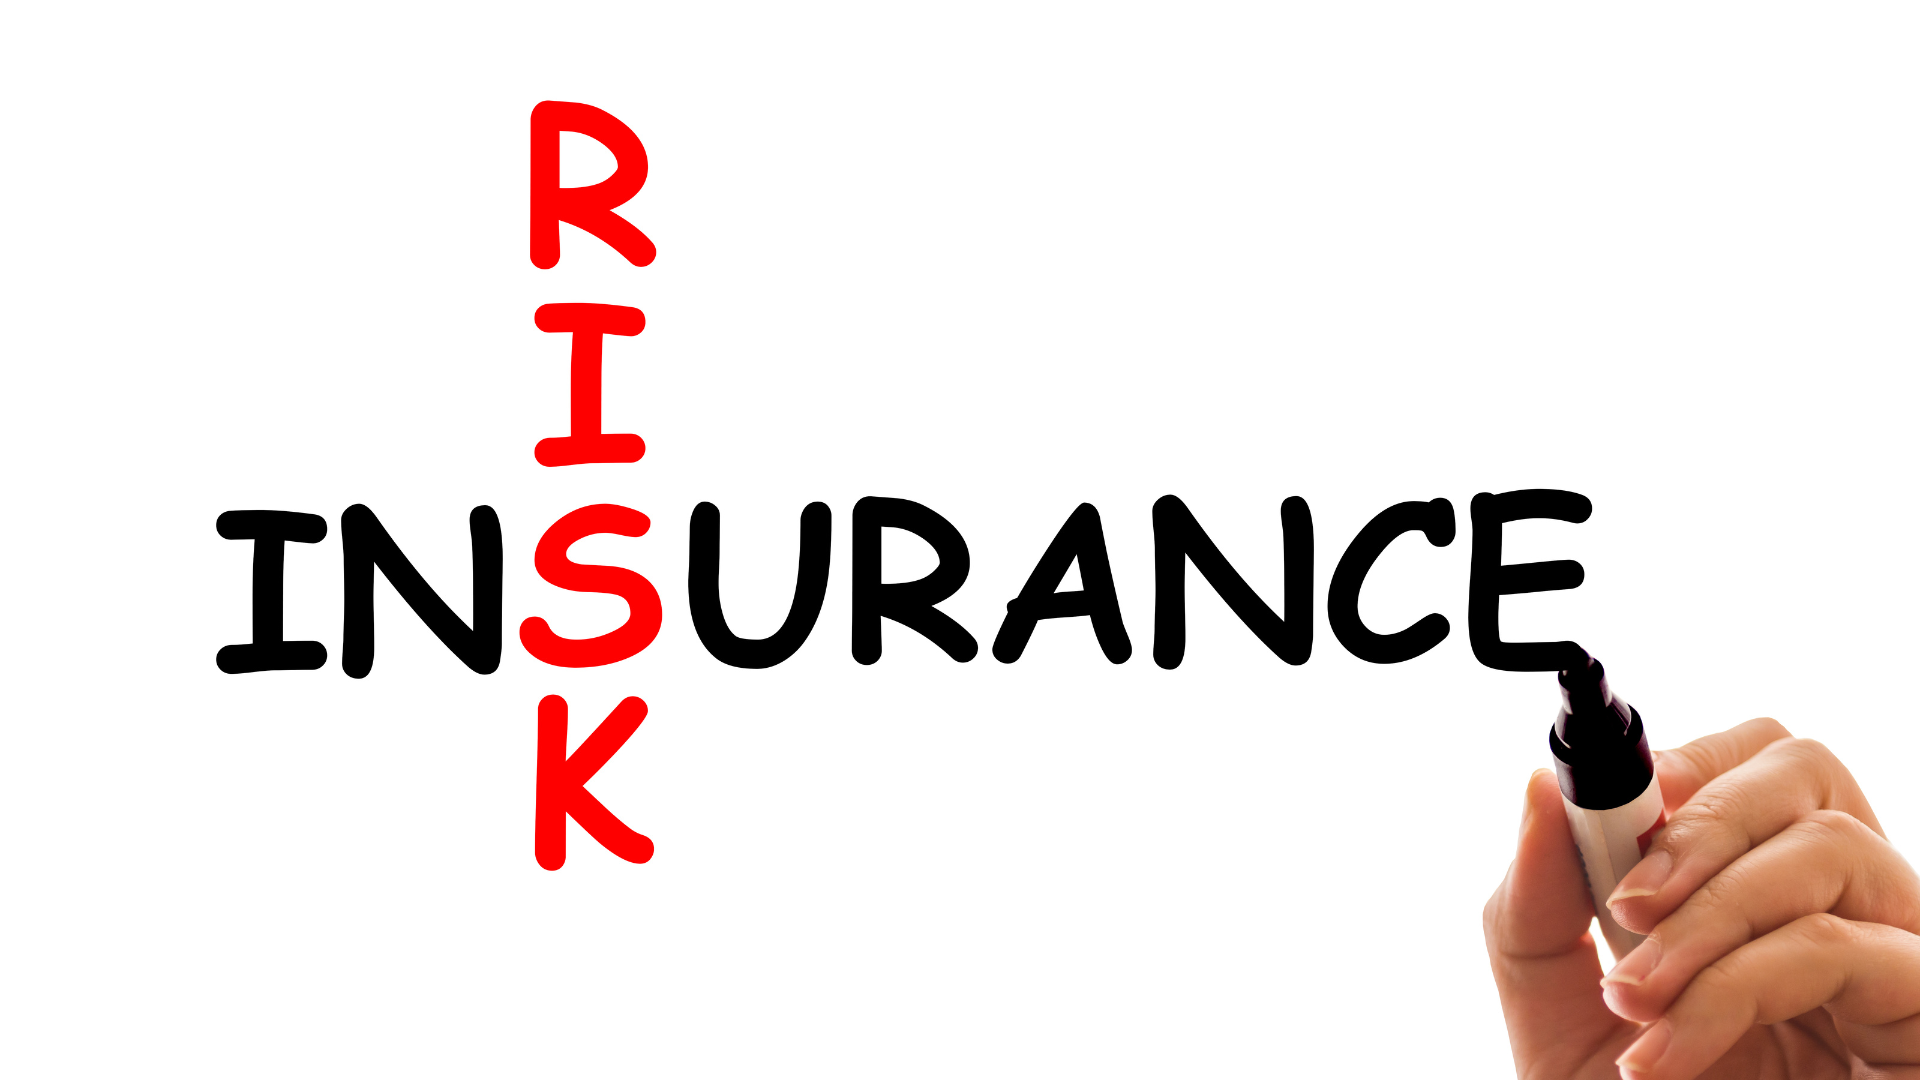 What to do when there’s a business demand for insurance on risks 101